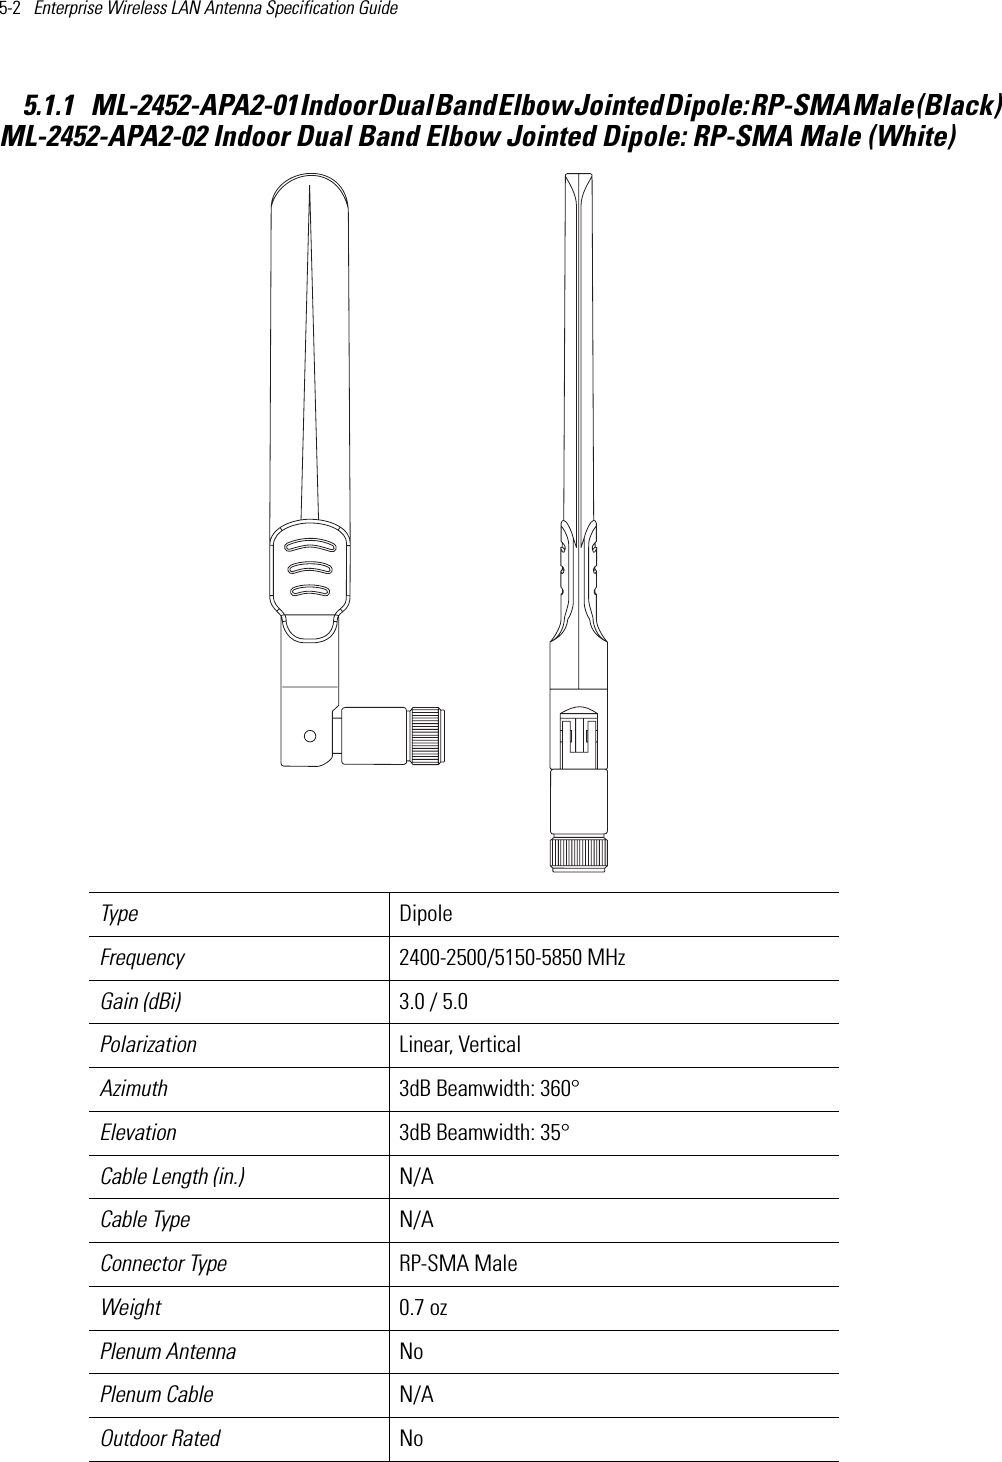 5-2   Enterprise Wireless LAN Antenna Specification Guide 5.1.1  ML-2452-APA2-01 Indoor Dual Band Elbow Jointed Dipole: RP-SMA Male (Black)                                      ML-2452-APA2-02 Indoor Dual Band Elbow Jointed Dipole: RP-SMA Male (White)Type DipoleFrequency 2400-2500/5150-5850 MHzGain (dBi) 3.0 / 5.0Polarization Linear, VerticalAzimuth 3dB Beamwidth: 360°Elevation 3dB Beamwidth: 35°Cable Length (in.) N/ACable Type N/AConnector Type RP-SMA Male Weight 0.7 ozPlenum Antenna NoPlenum Cable N/AOutdoor Rated No